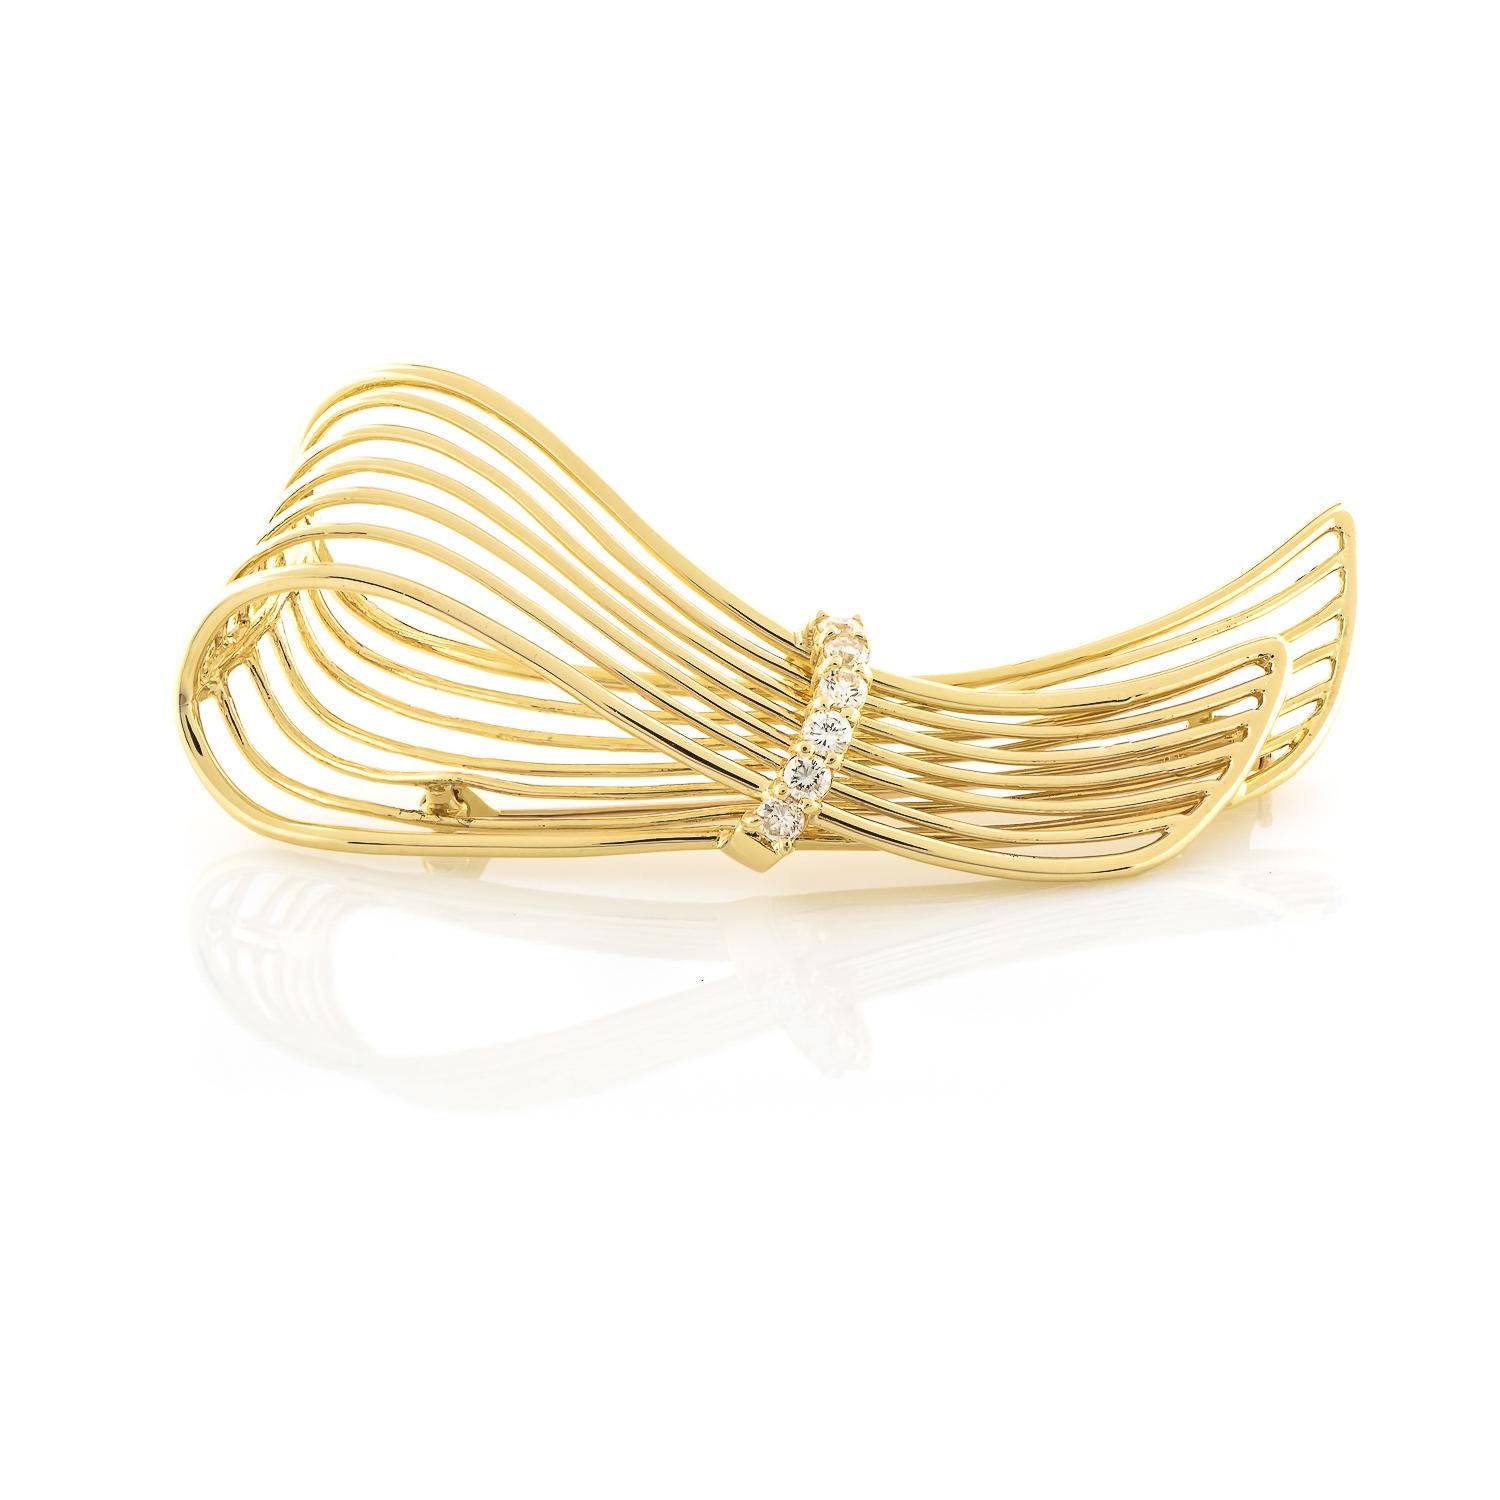 All the elegance and grace tied up in a sparkling ribbon for one special lady! This glamorous pin has six round diamonds 0.42ctw (G Color and VS Clarity) and is crafted in 18K yellow gold in a wire structure overlapping one end over the other. This